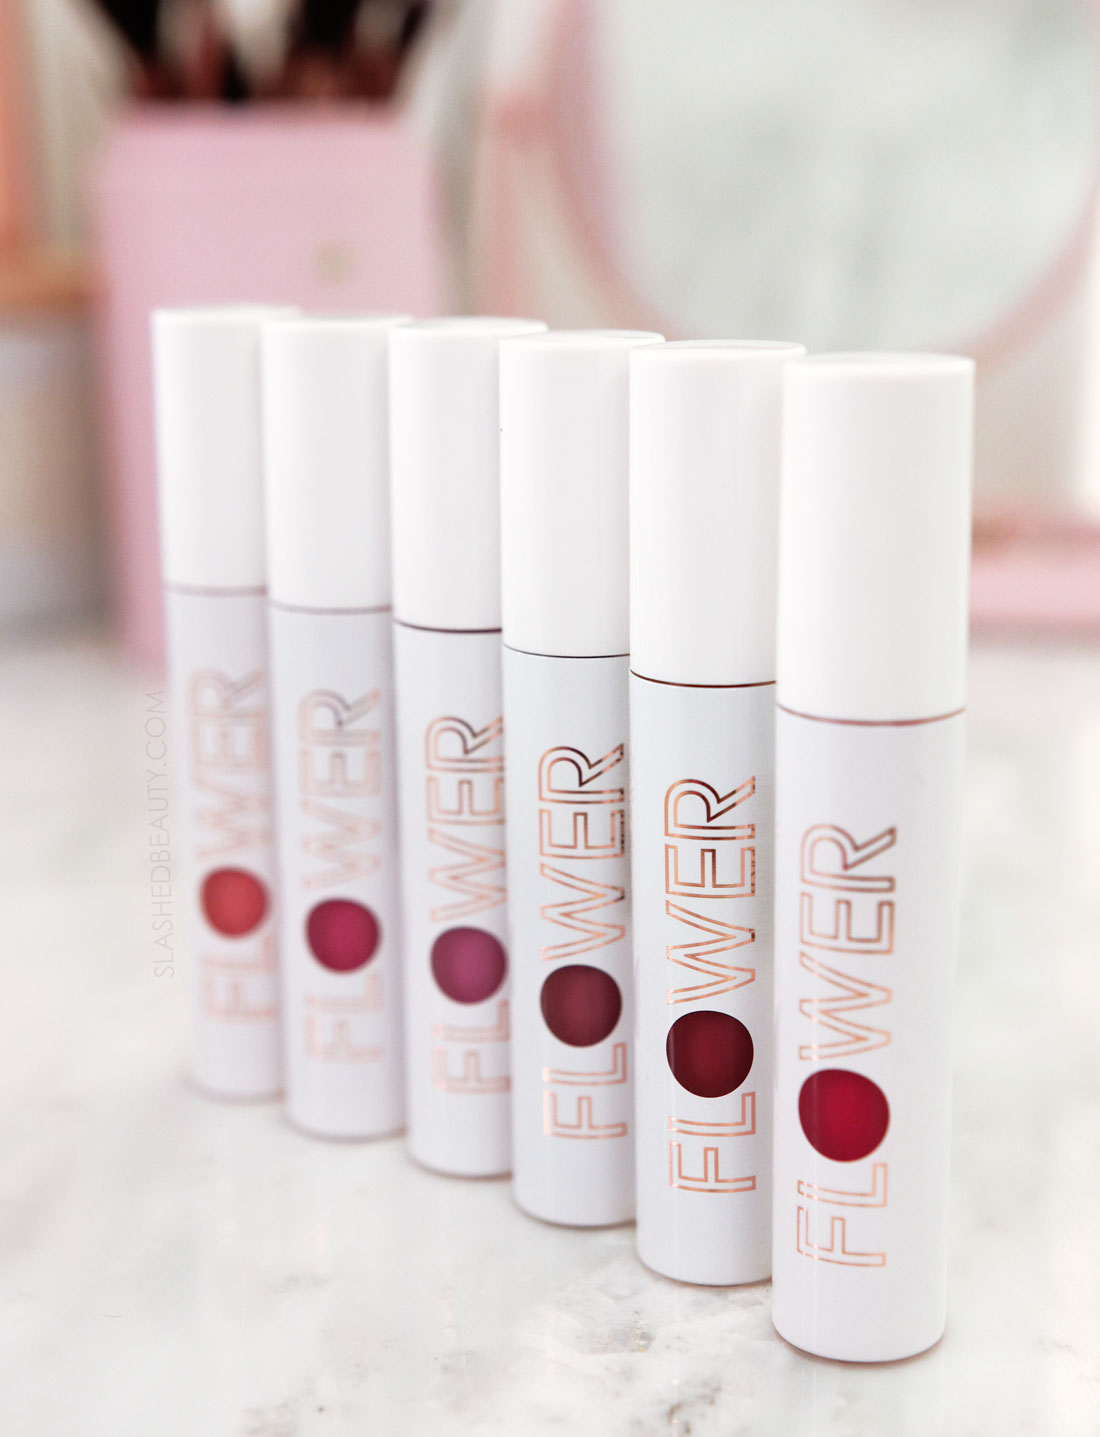 Closed tubes of Flower Beauty Bitten Lip Stain standing side by side on a vanity | Flower Beauty Bitten Lip Stains Review & Swatches | Slashed Beauty